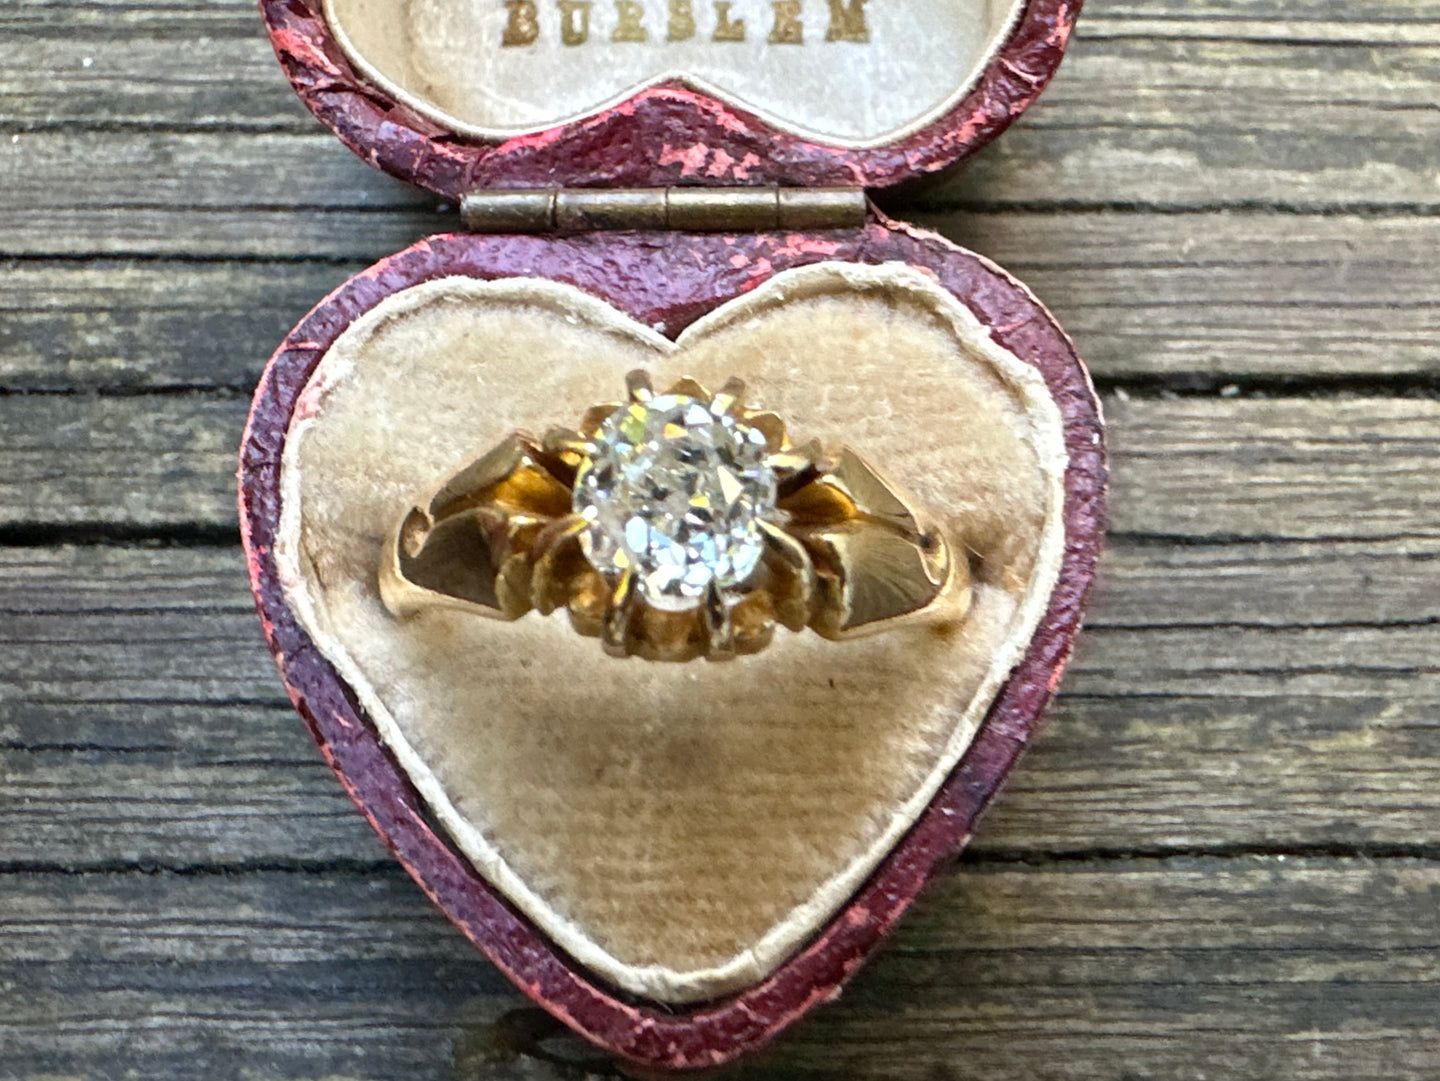 VICTORIAN SOLITAIRE DIAMOND RING IN 18KT YELLOW GOLD